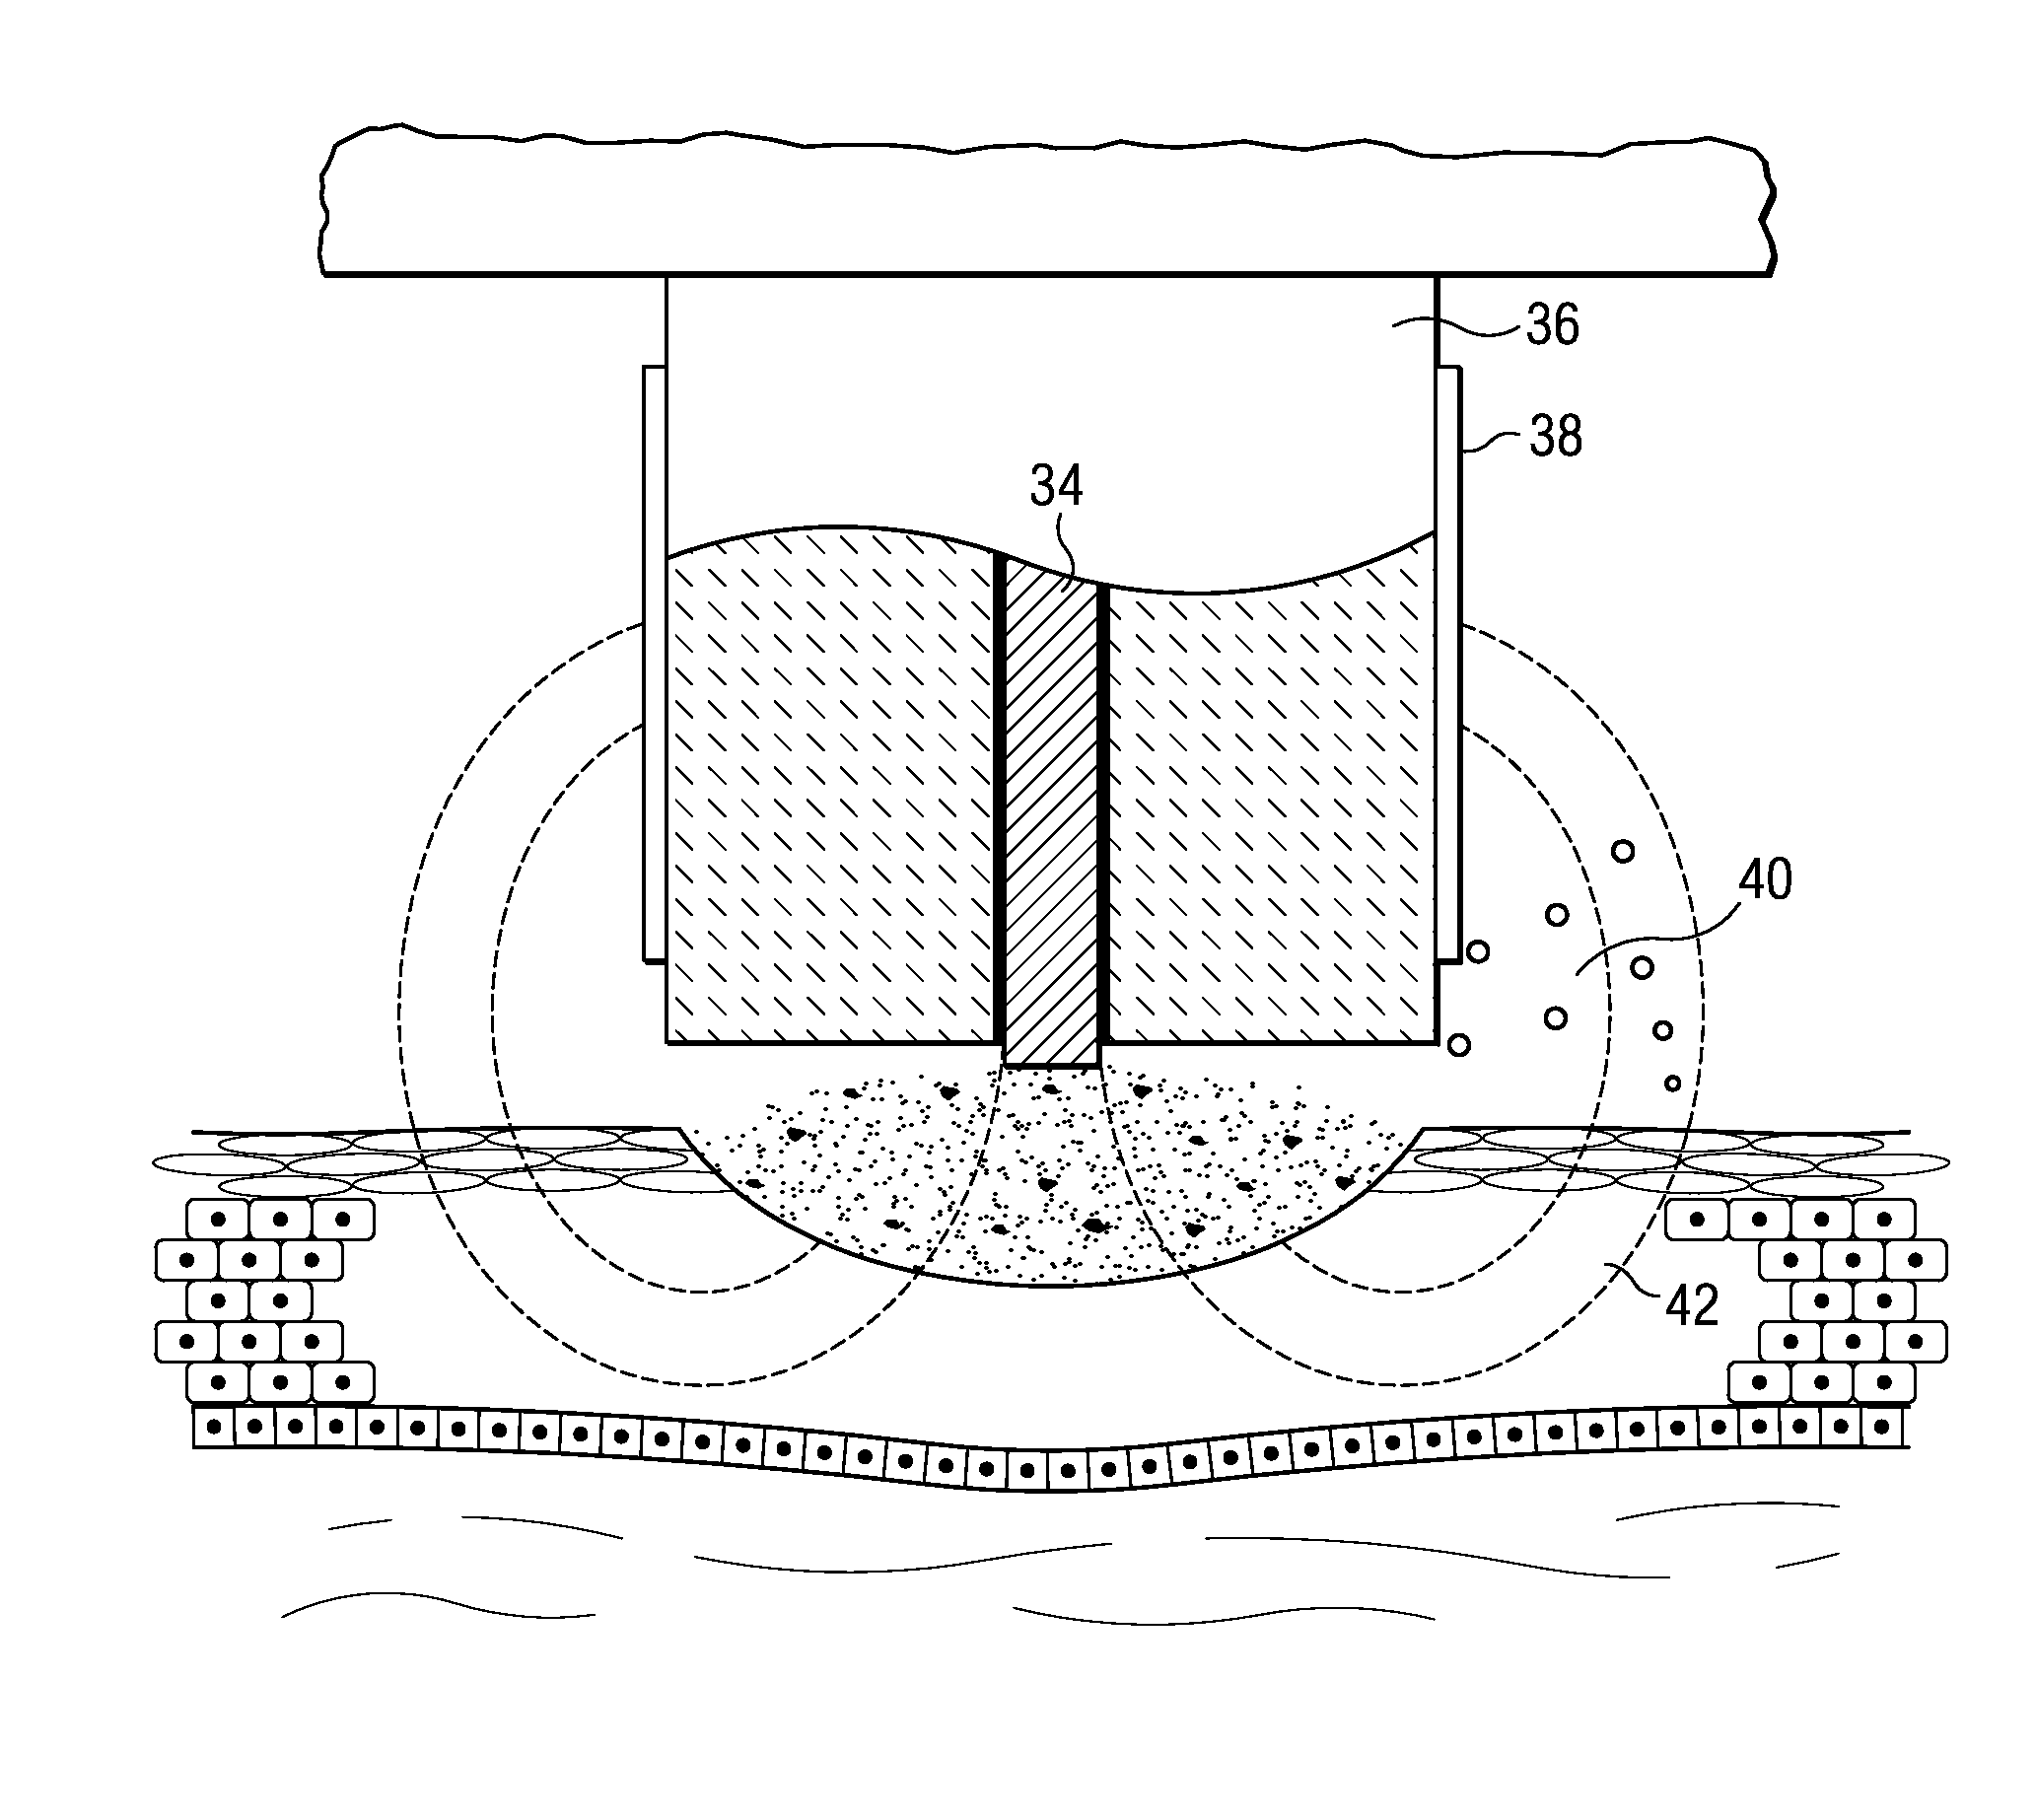 Electrosurgical system and method for sterilizing chronic wound tissue